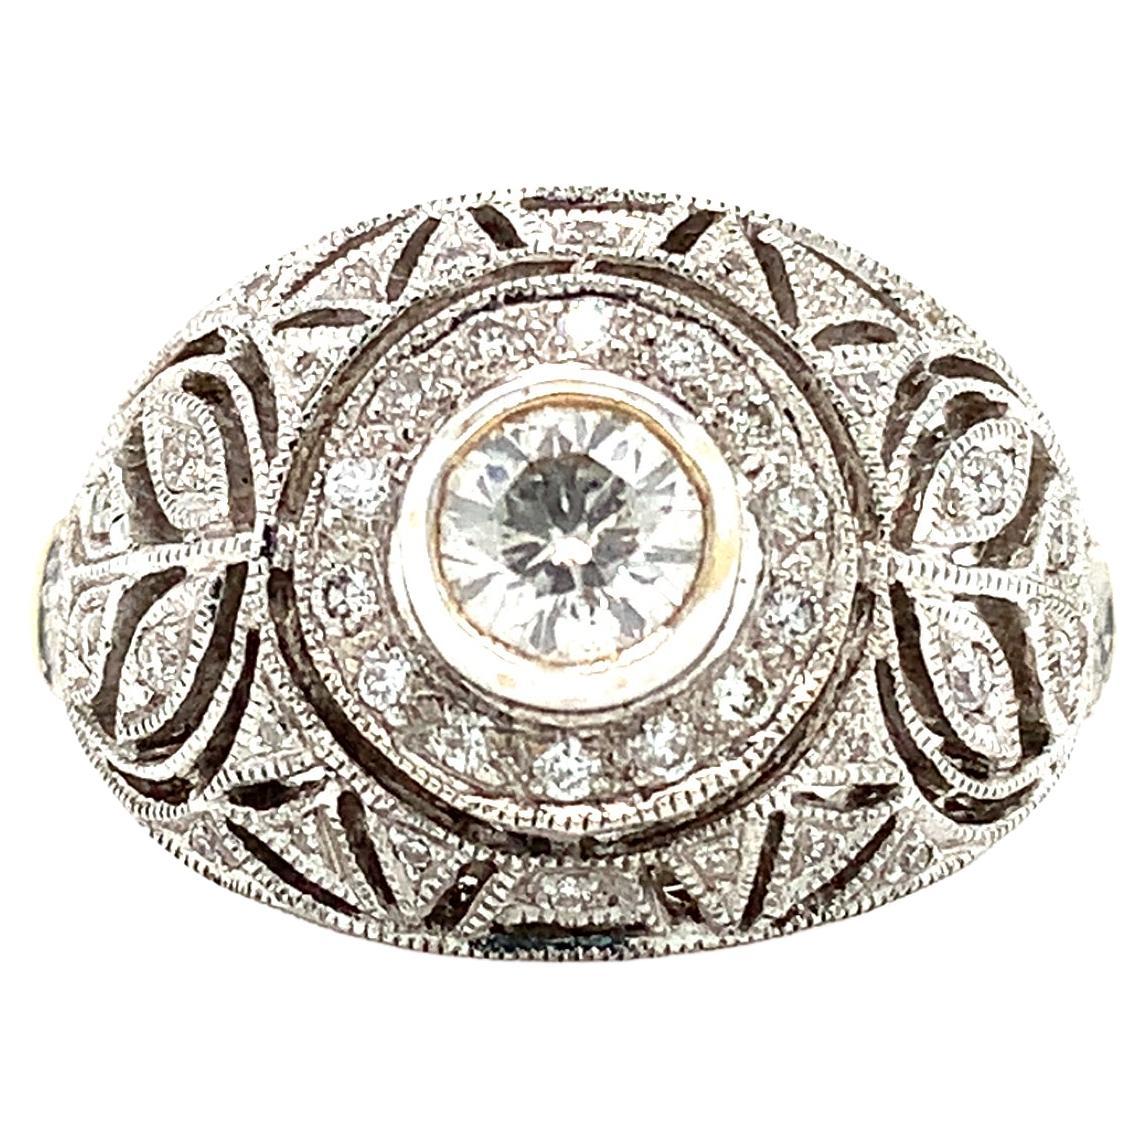 Diamond art deco dome cocktail ring 18k white gold For Sale